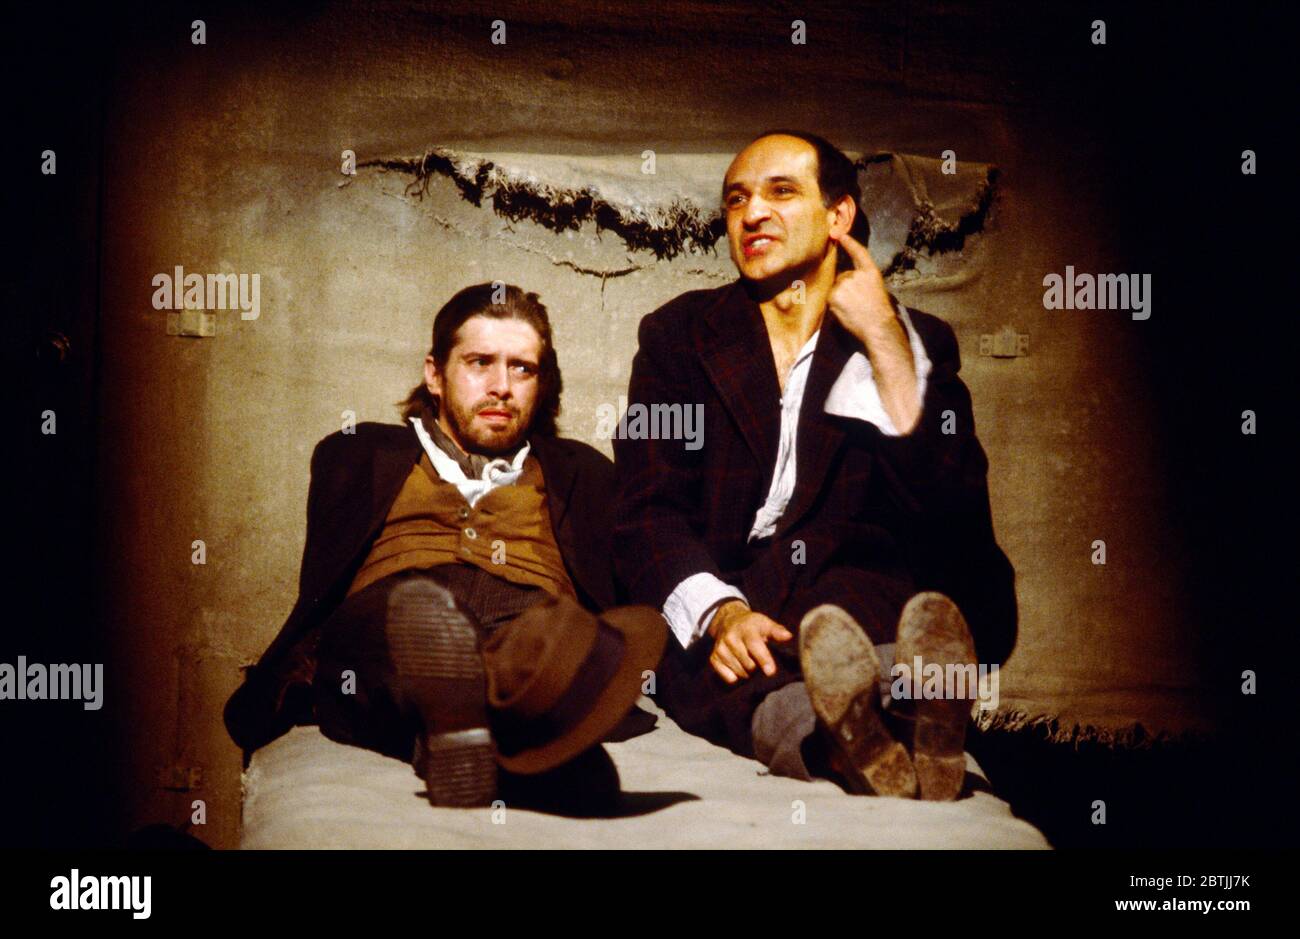 BAAL by Bertolt Brecht Design: Ralph Koltai Beleuchtung: Leo Leibovici Regie: David Jones l-r: Nigel Terry (Ekart), Ben Kingsley (Baal) Royal Shakespeare Company (RSC) / The Other Place, Stratford-upon-Avon, England 01/08/1979 (C) Donald Cooper/PhotoStage photos@photostage.co.uk Ref/CT-01 Stockfoto